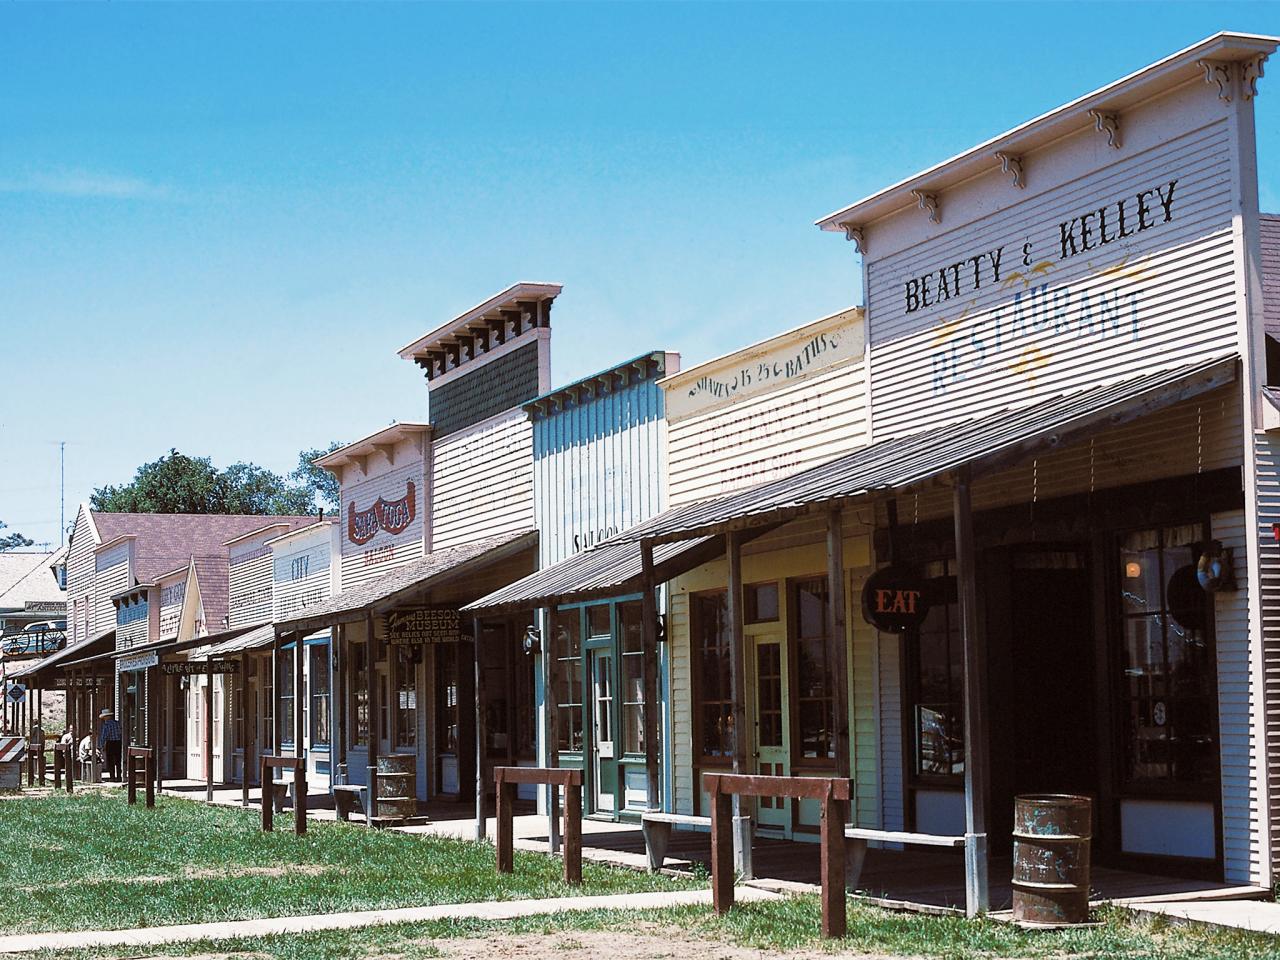 Dodge City Boothill Museum - Not In Jersey